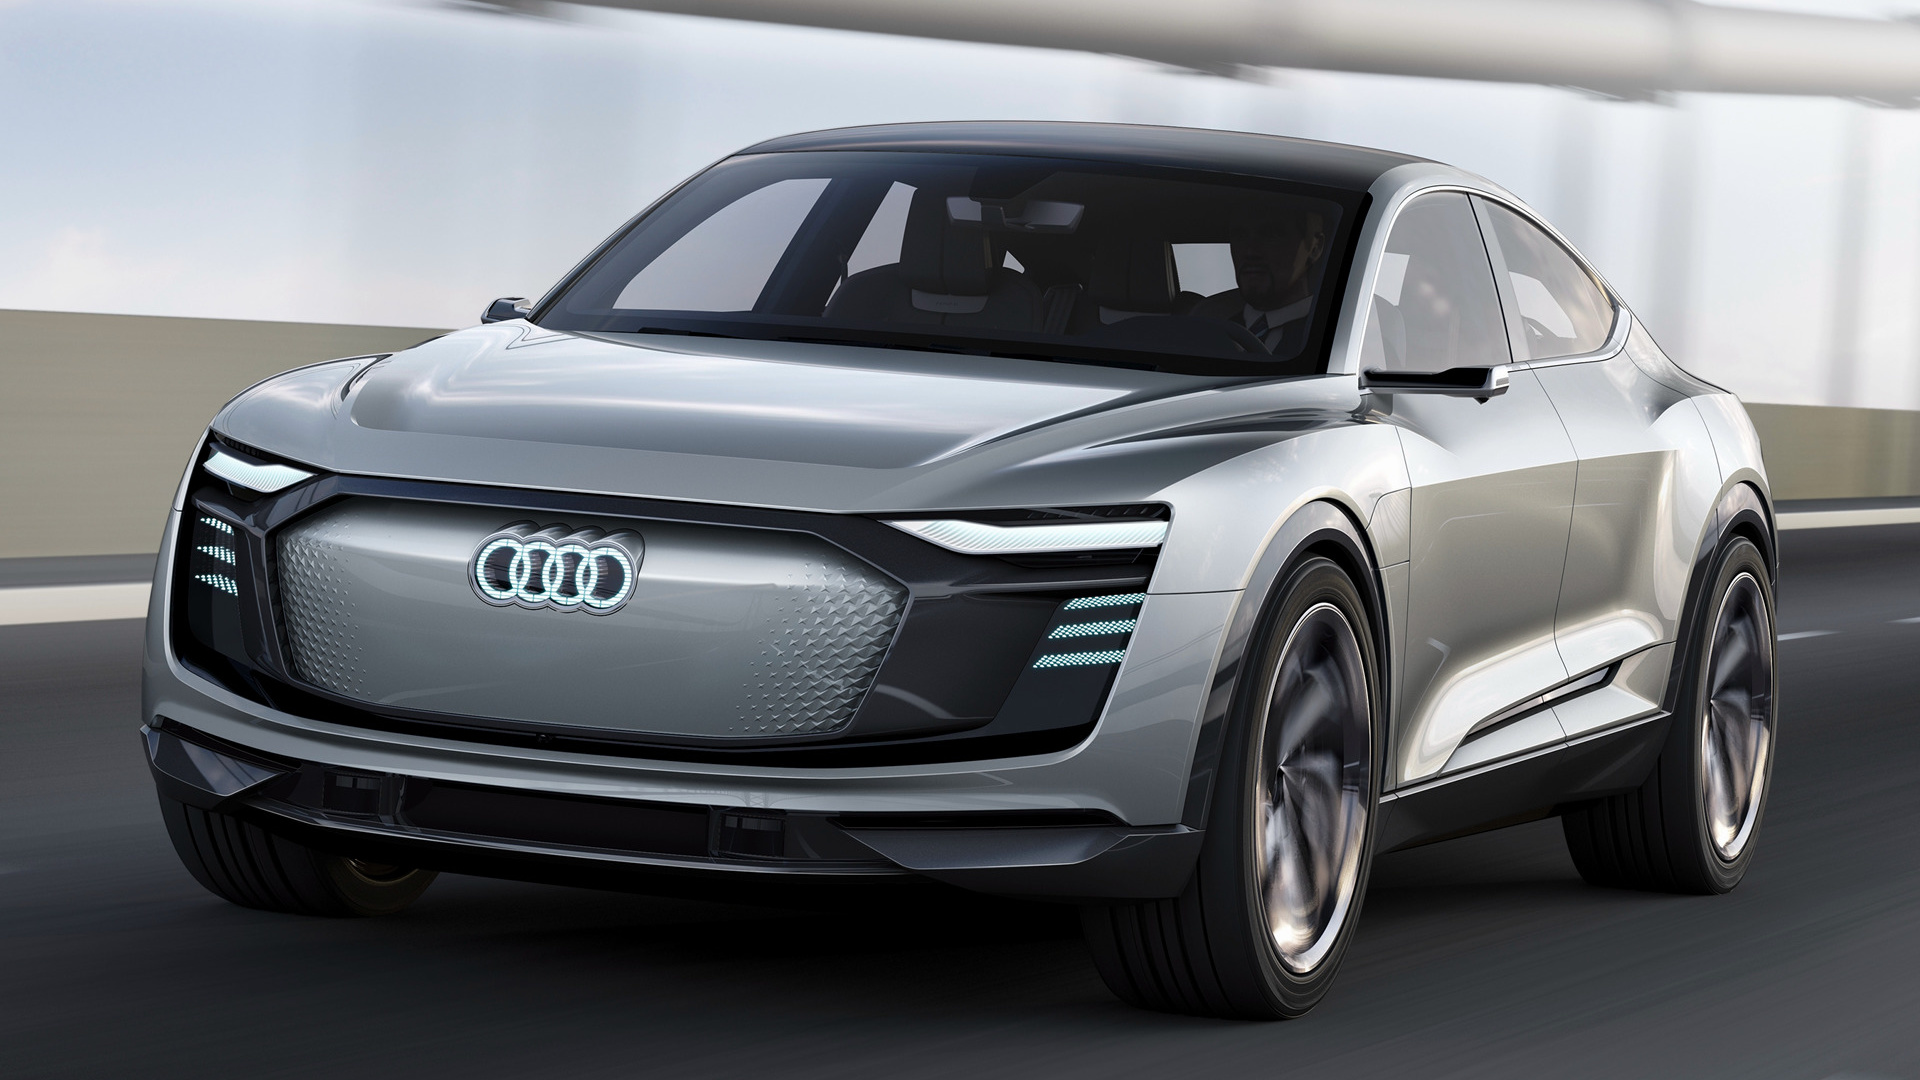 Audi Plans To Launch 20 Electrified Models By 2025